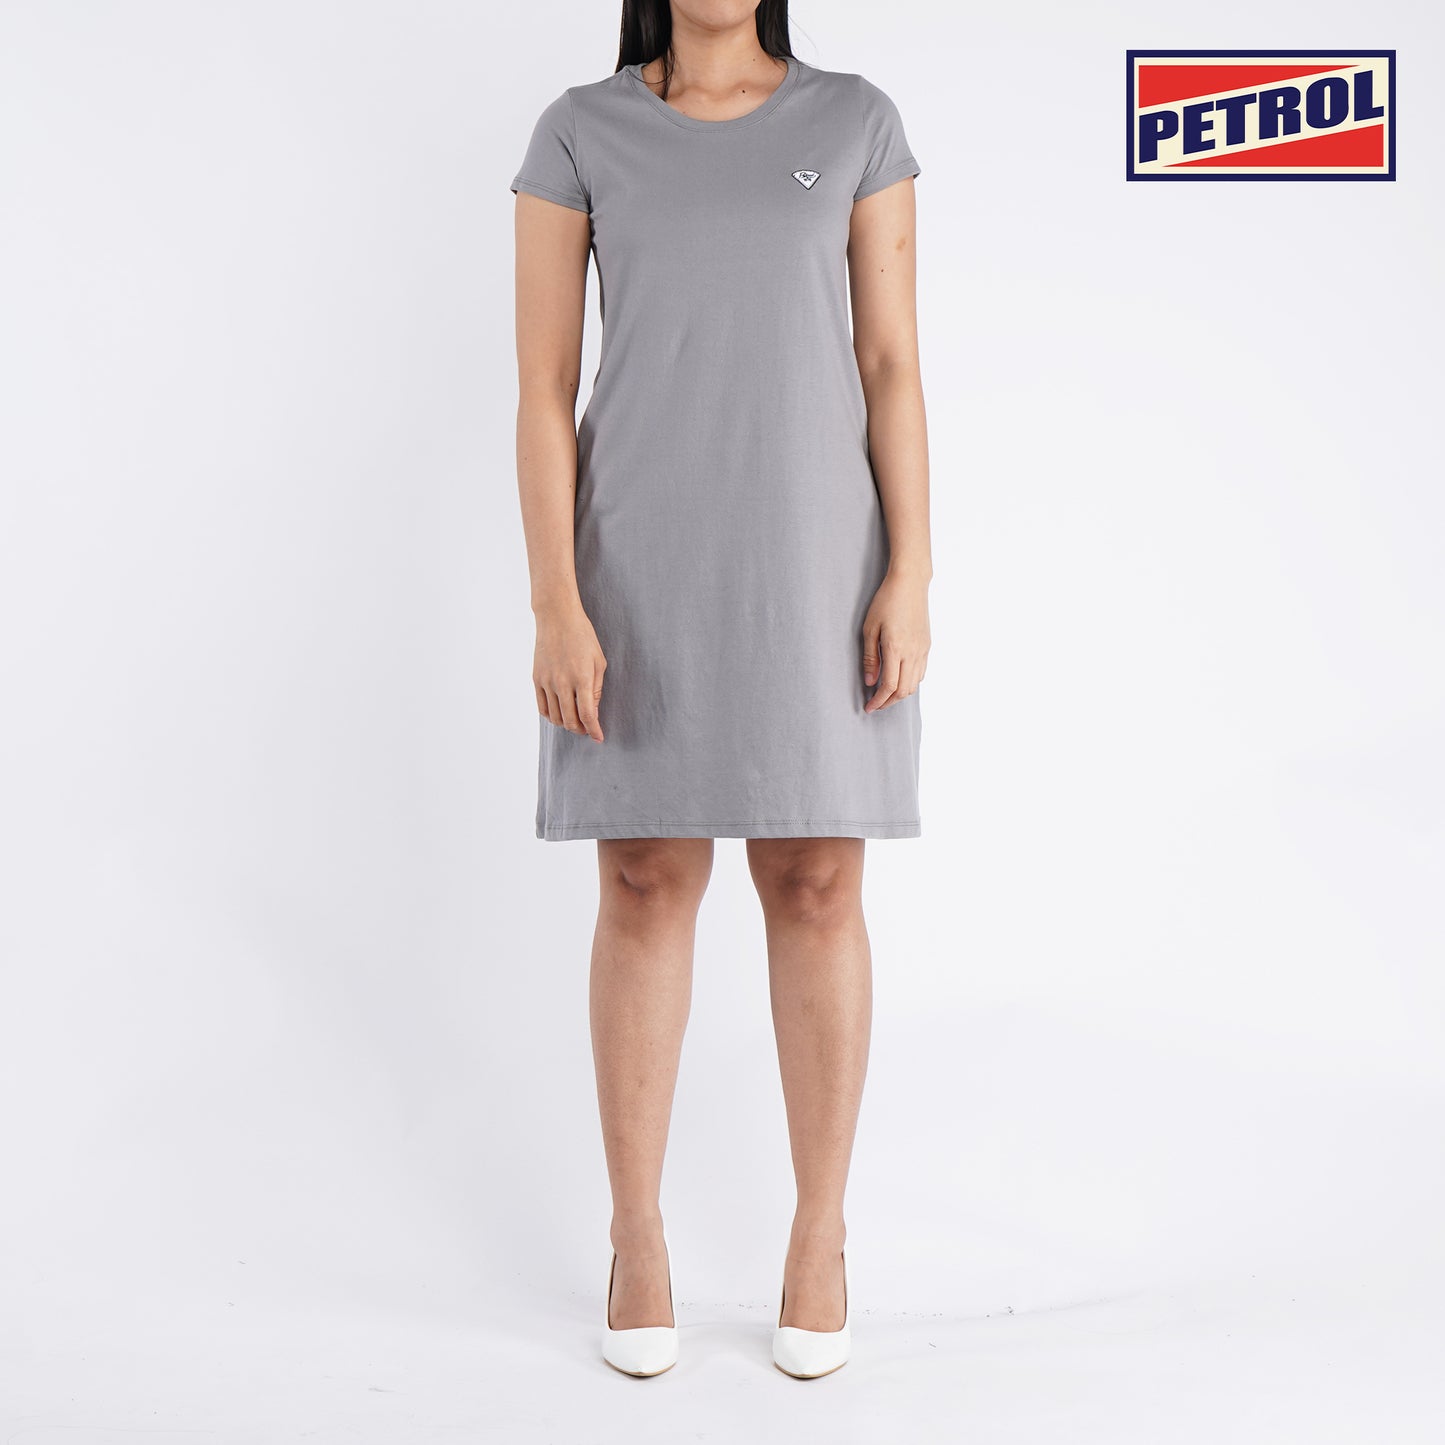 Petrol Ladies' Modified Dress Regular Fitting Blouse CVC Jersey Fabric Trendy fashion Casual Top Gray Dress for Ladies 141665 (Gray)